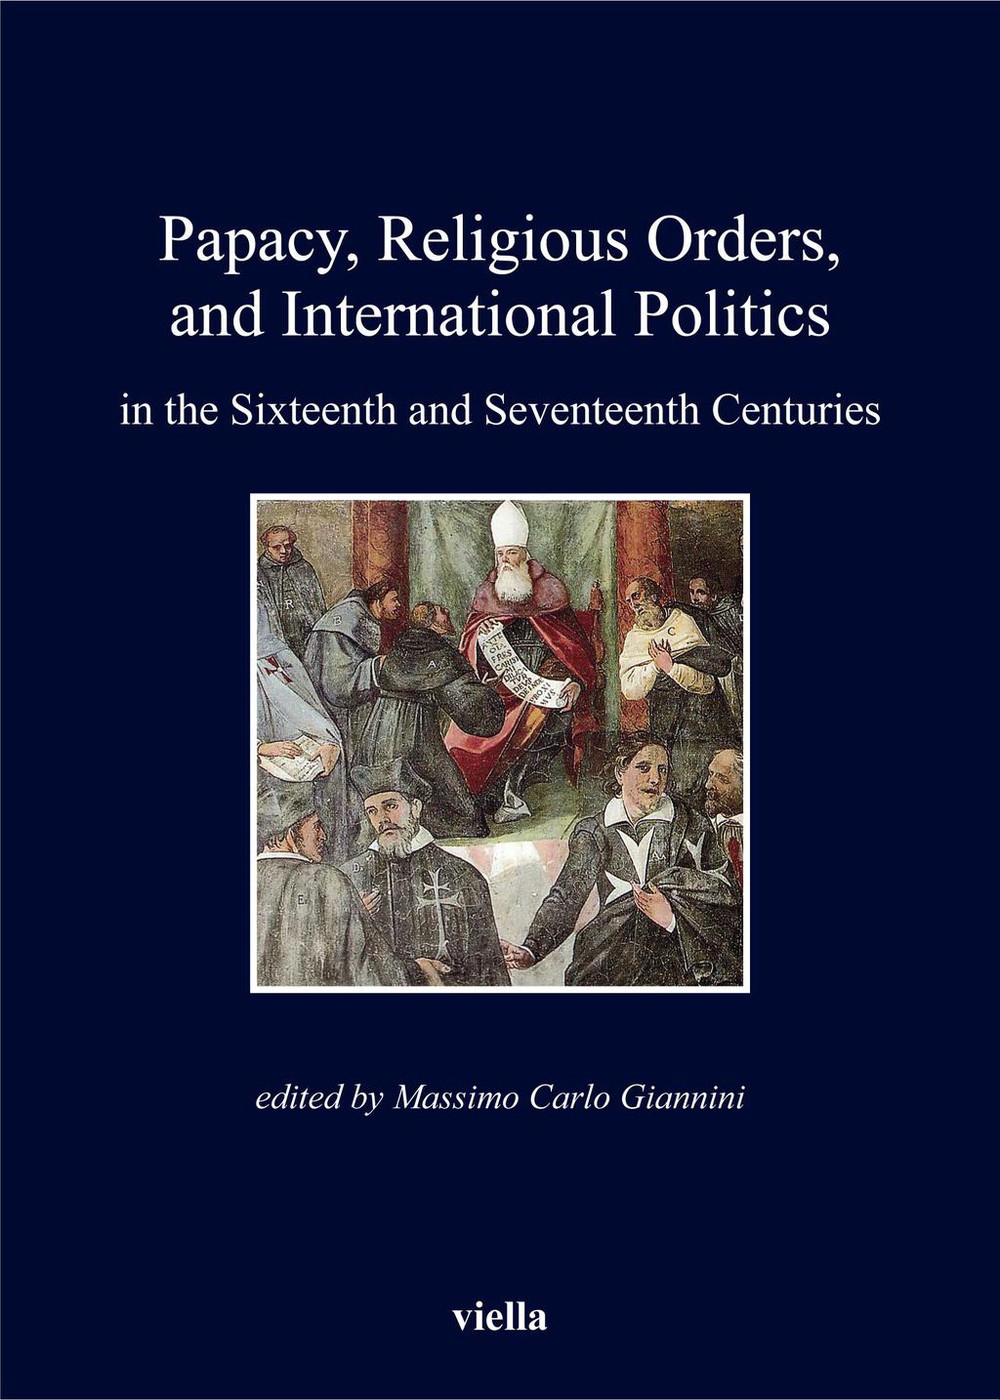 Papacy, Religious Orders, and International Politics in the Sixteenth and Seventeenth Centuries - Librerie.coop